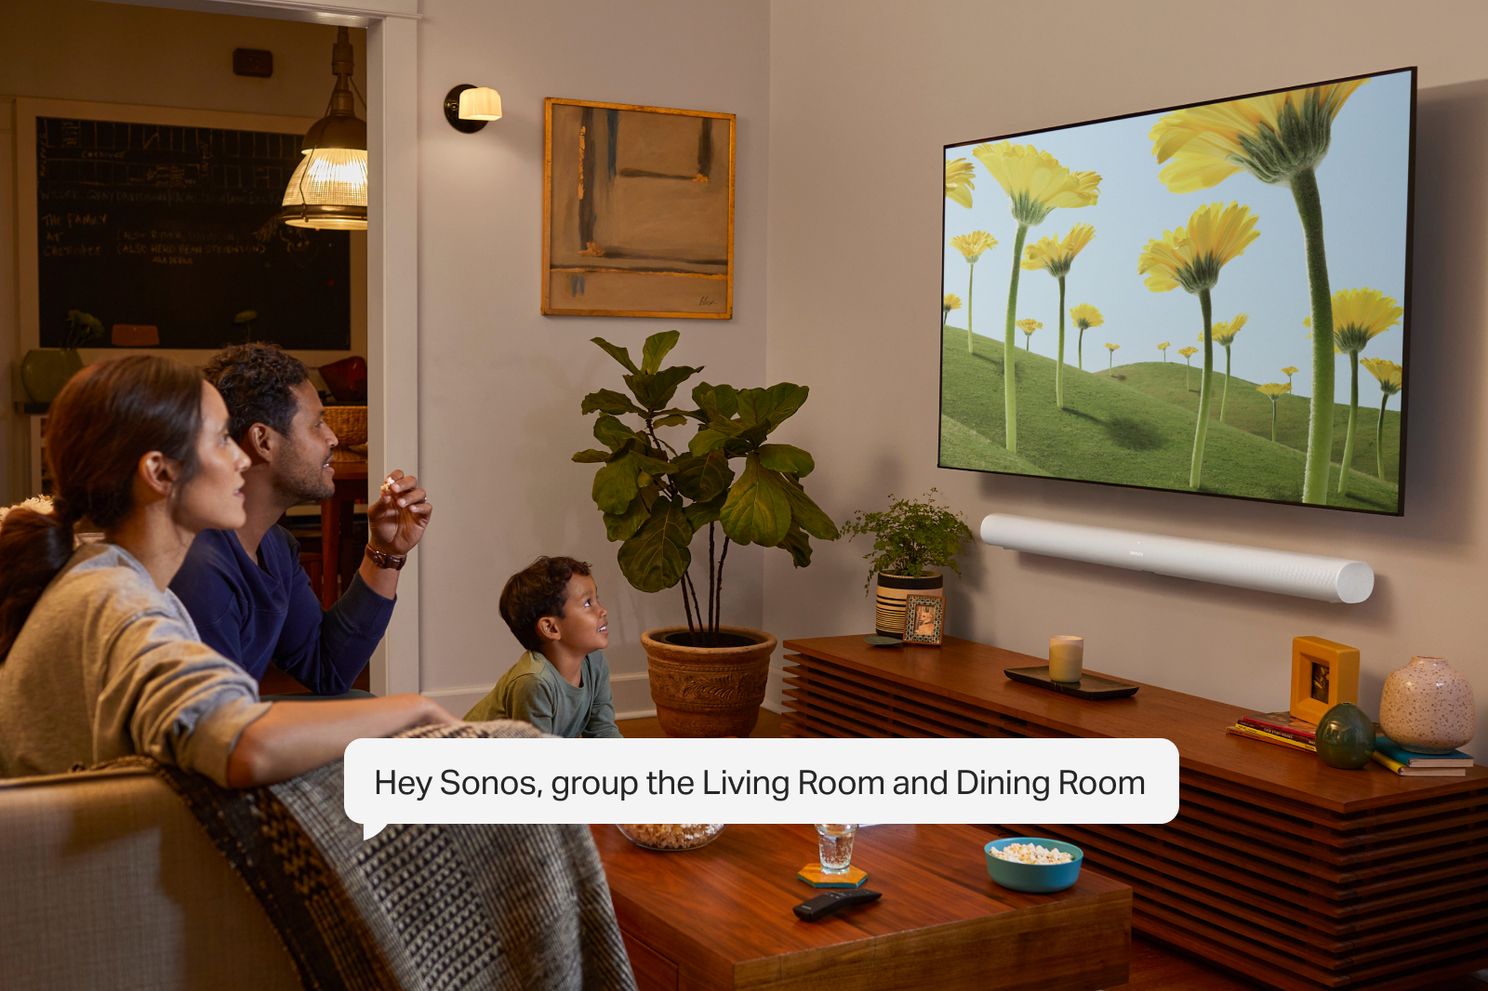 Sonos Voice Control Official: This is the Google Assistant alternative from Sonos